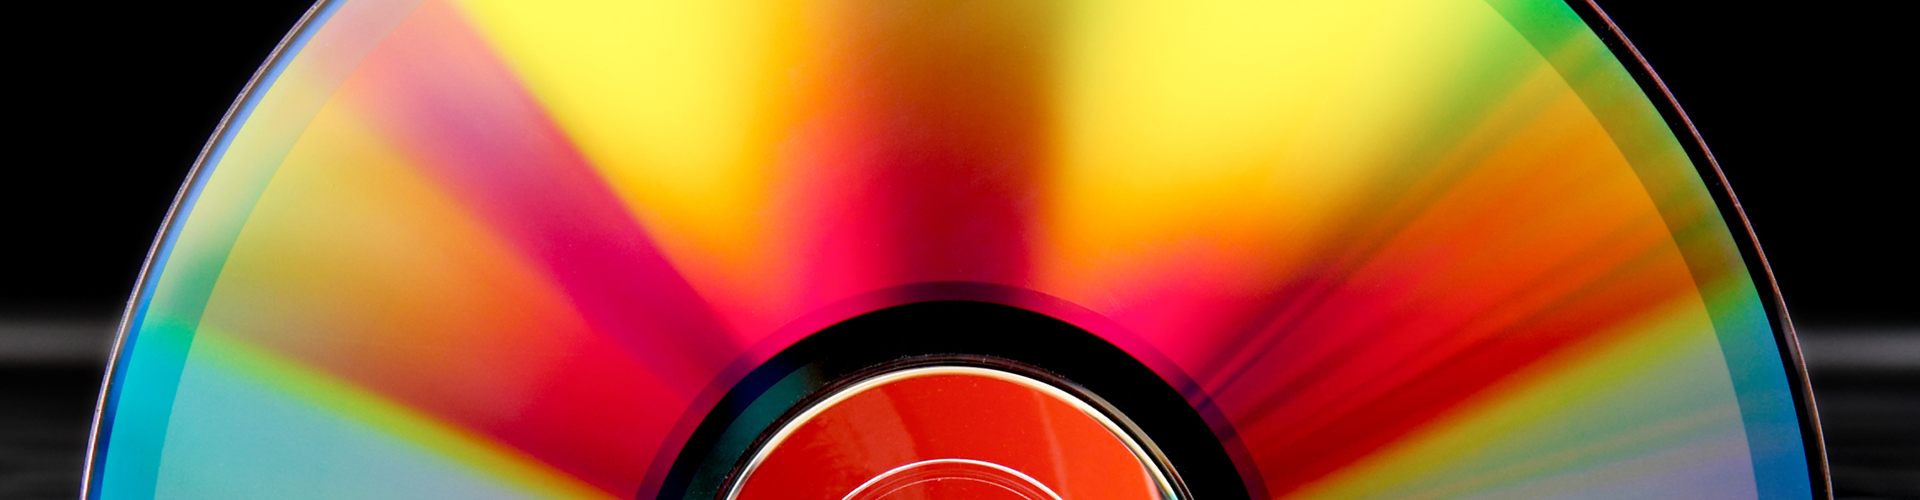 colorful CD